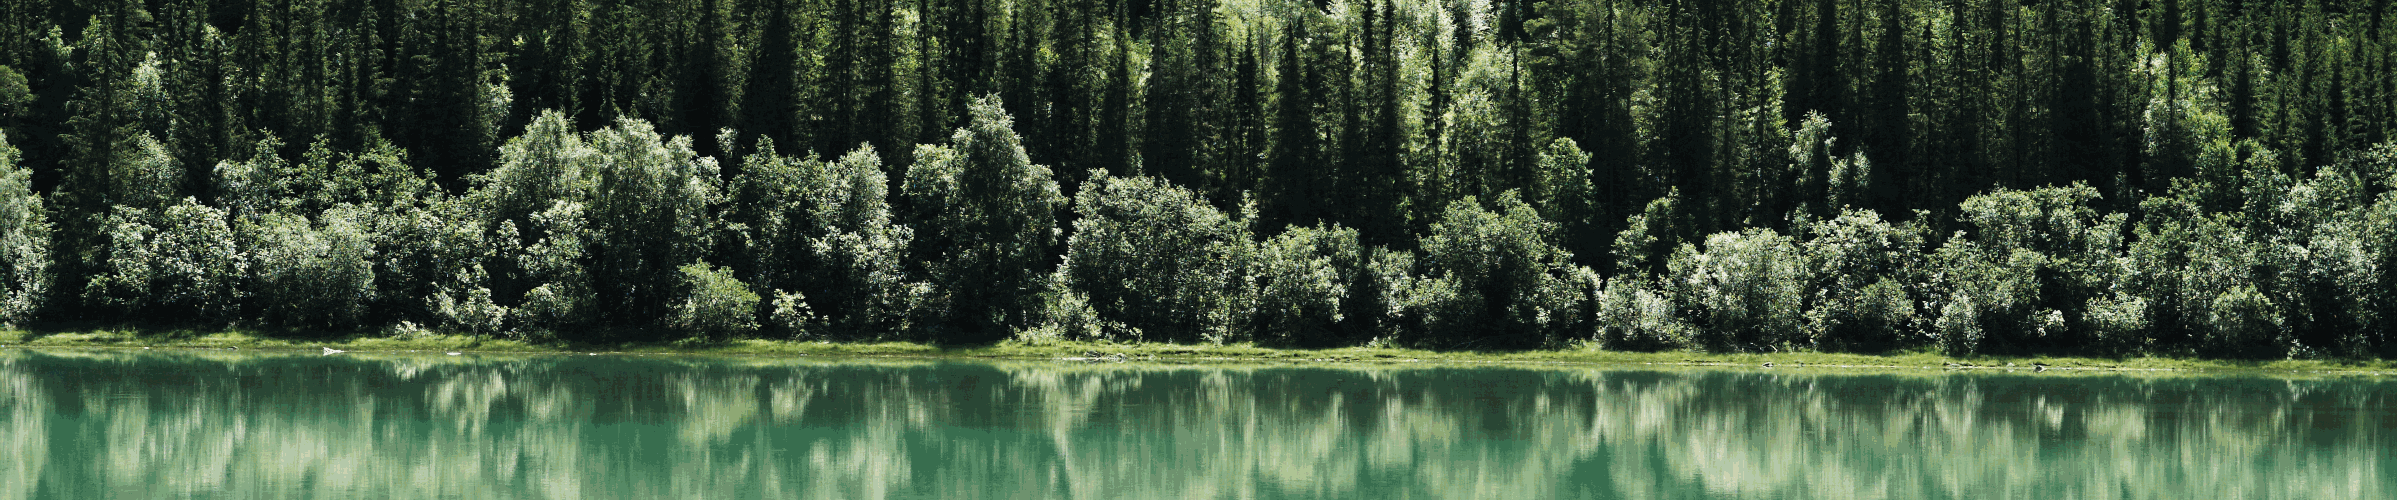 Forest reflected in lake